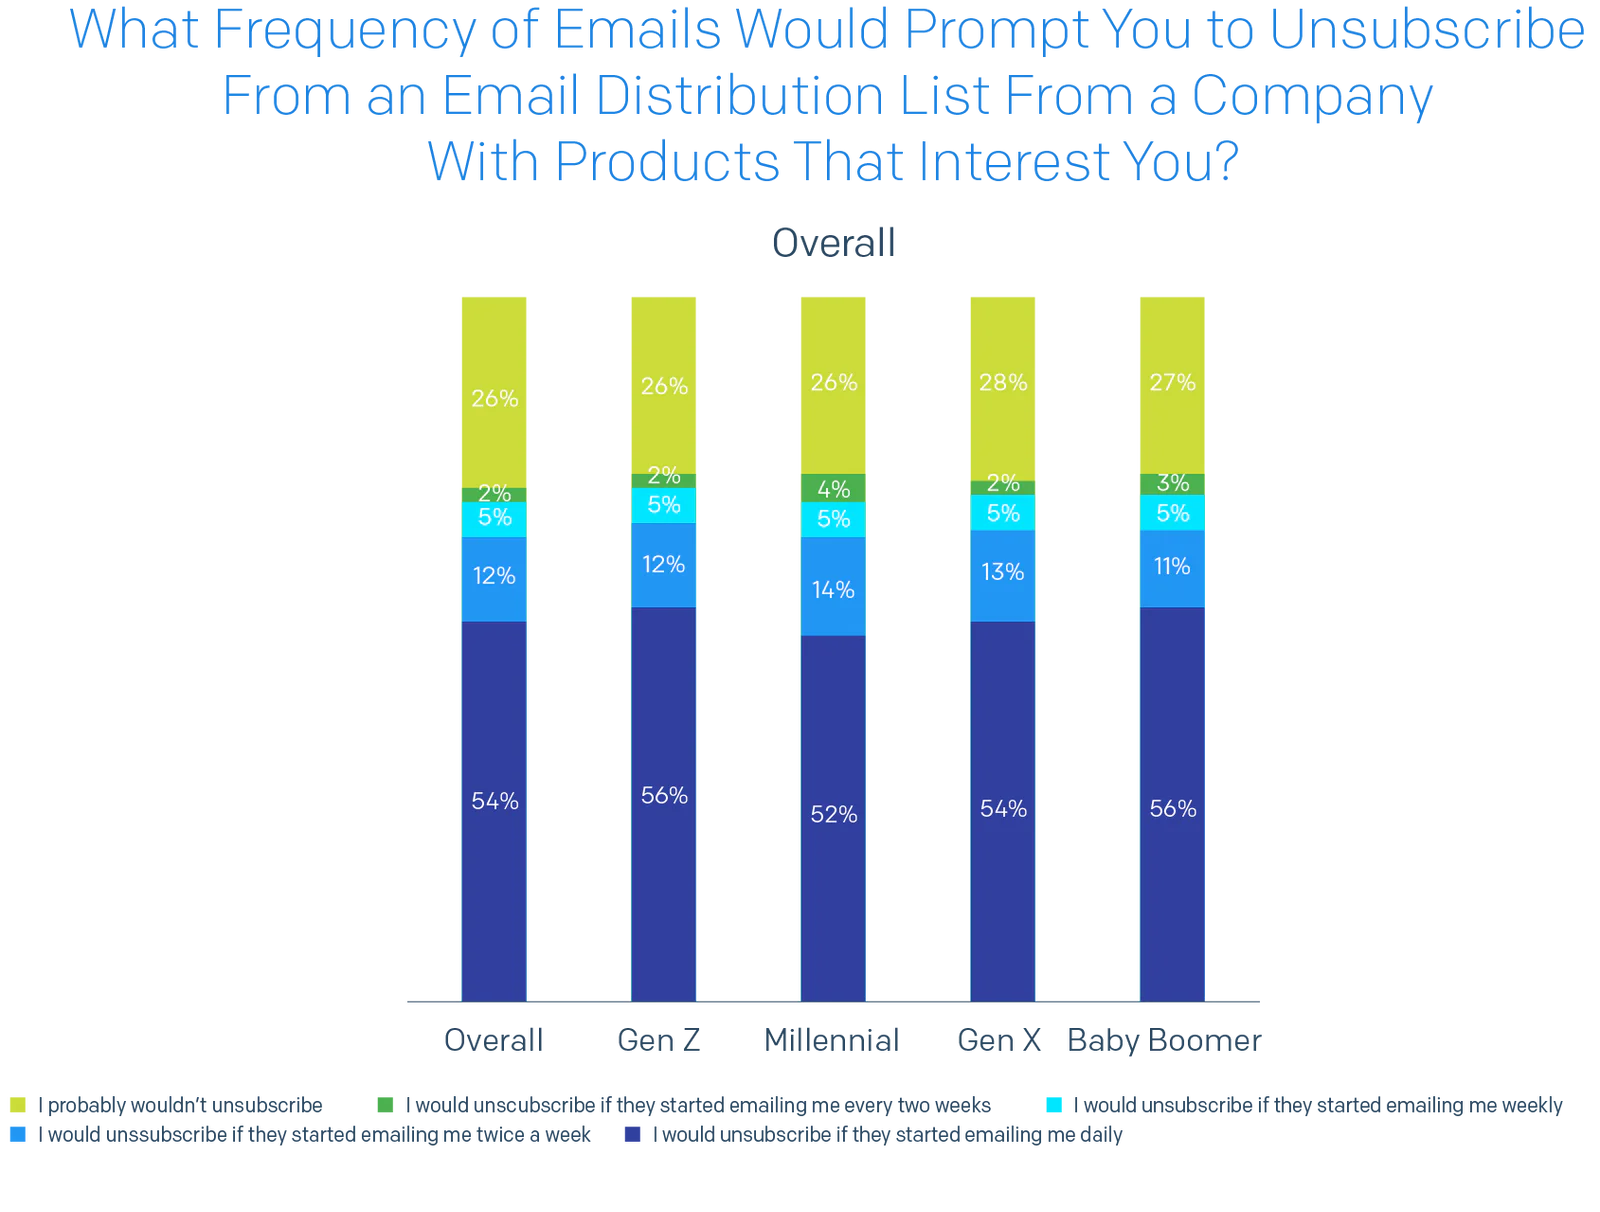 Bar chart of What frequency of emails would prompt you to unsubscribe from an email distribution list from a company with products that interest you?